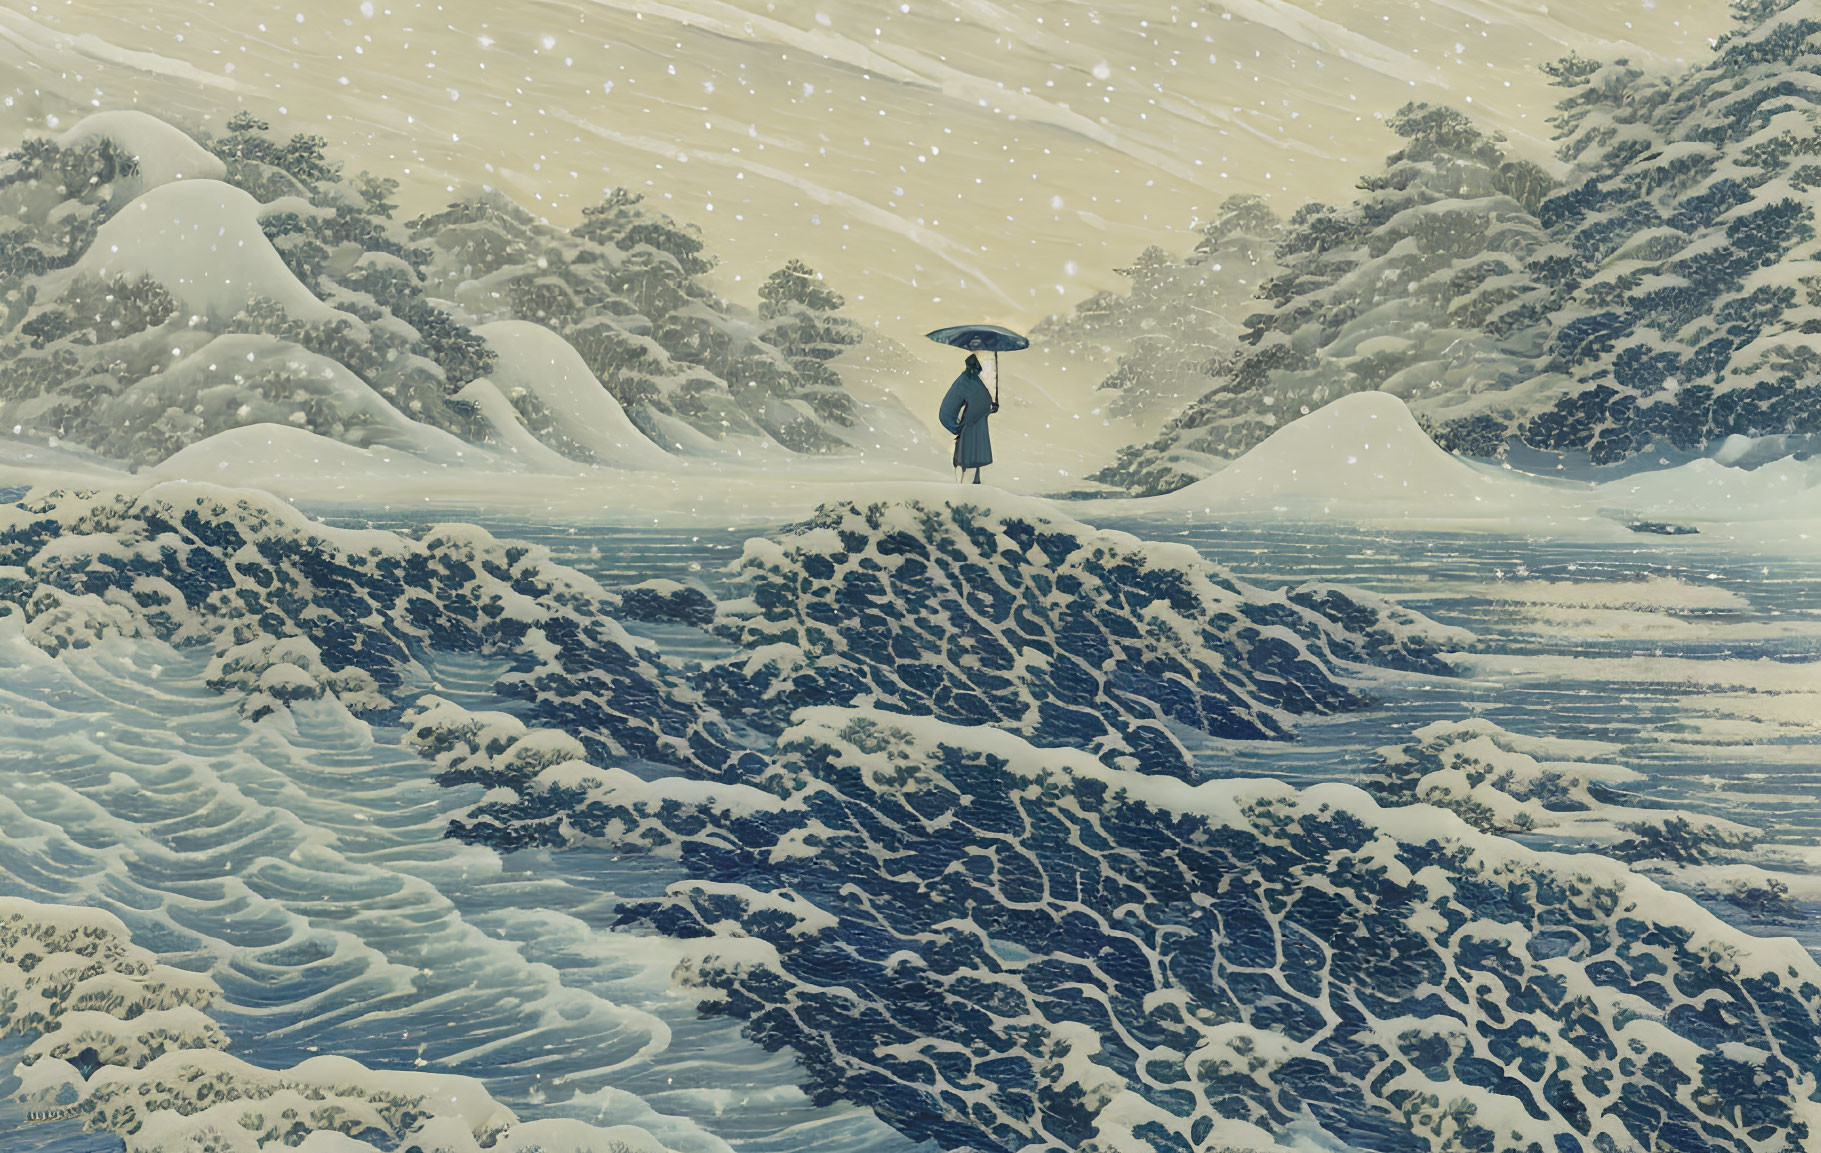 Solitary figure with umbrella in snowy hills and frothy waves